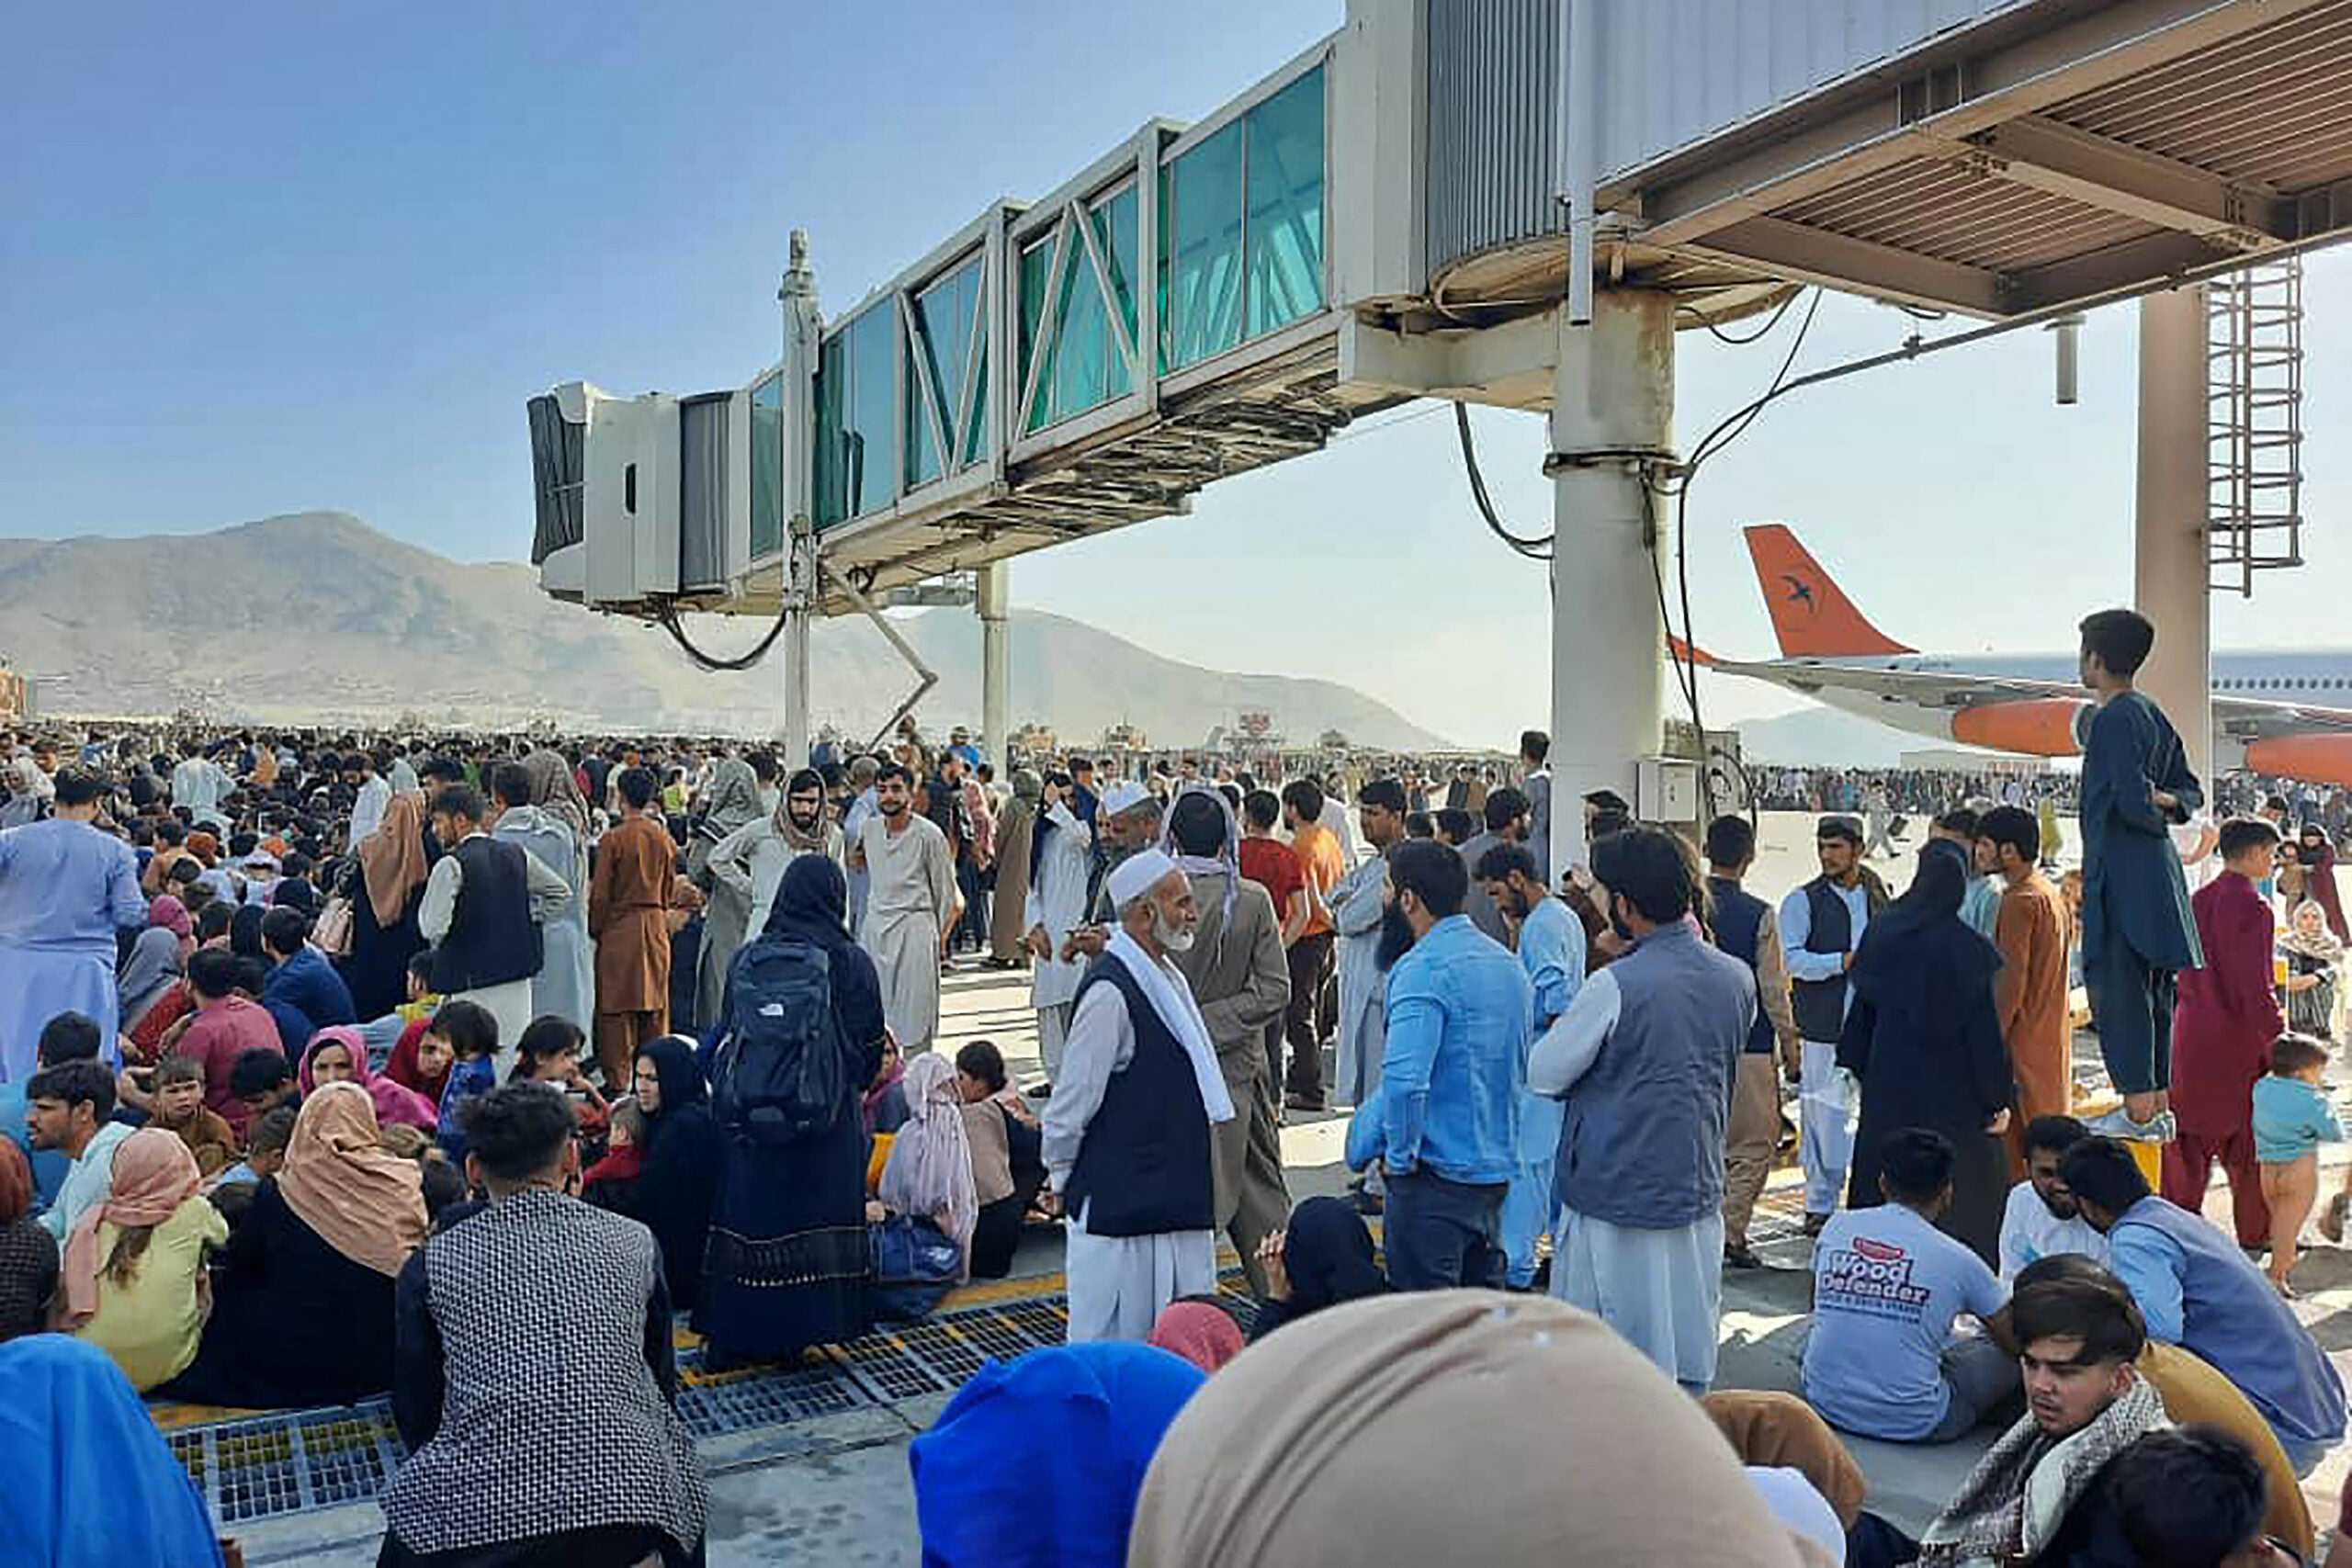 TOPSHOT - Afghans crowd at the tarmac of the Kabul airport on August 16, 2021, to flee the country as the Taliban were in control of Afghanistan after President Ashraf Ghani fled the country and conceded the insurgents had won the 20-year war. (Photo by - / AFP) (Photo by -/AFP via Getty Images)